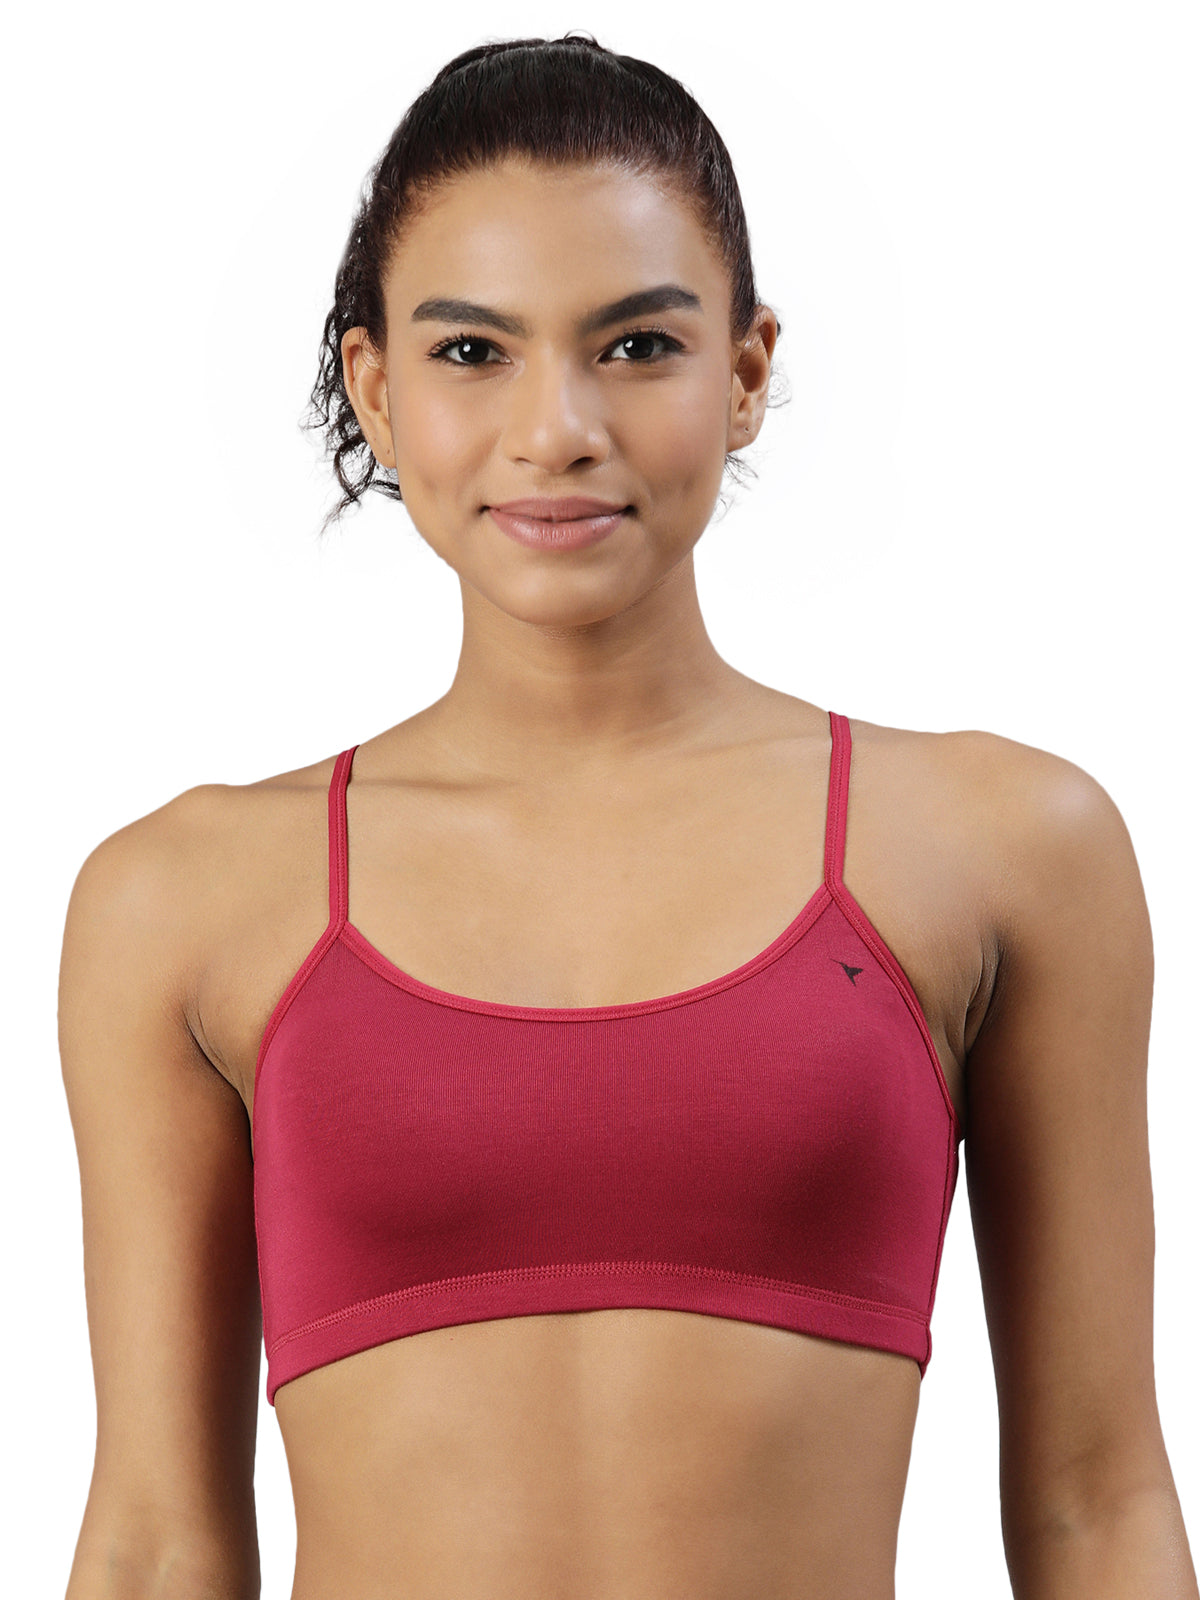 blossom-starters bra-red wine1-teen collection